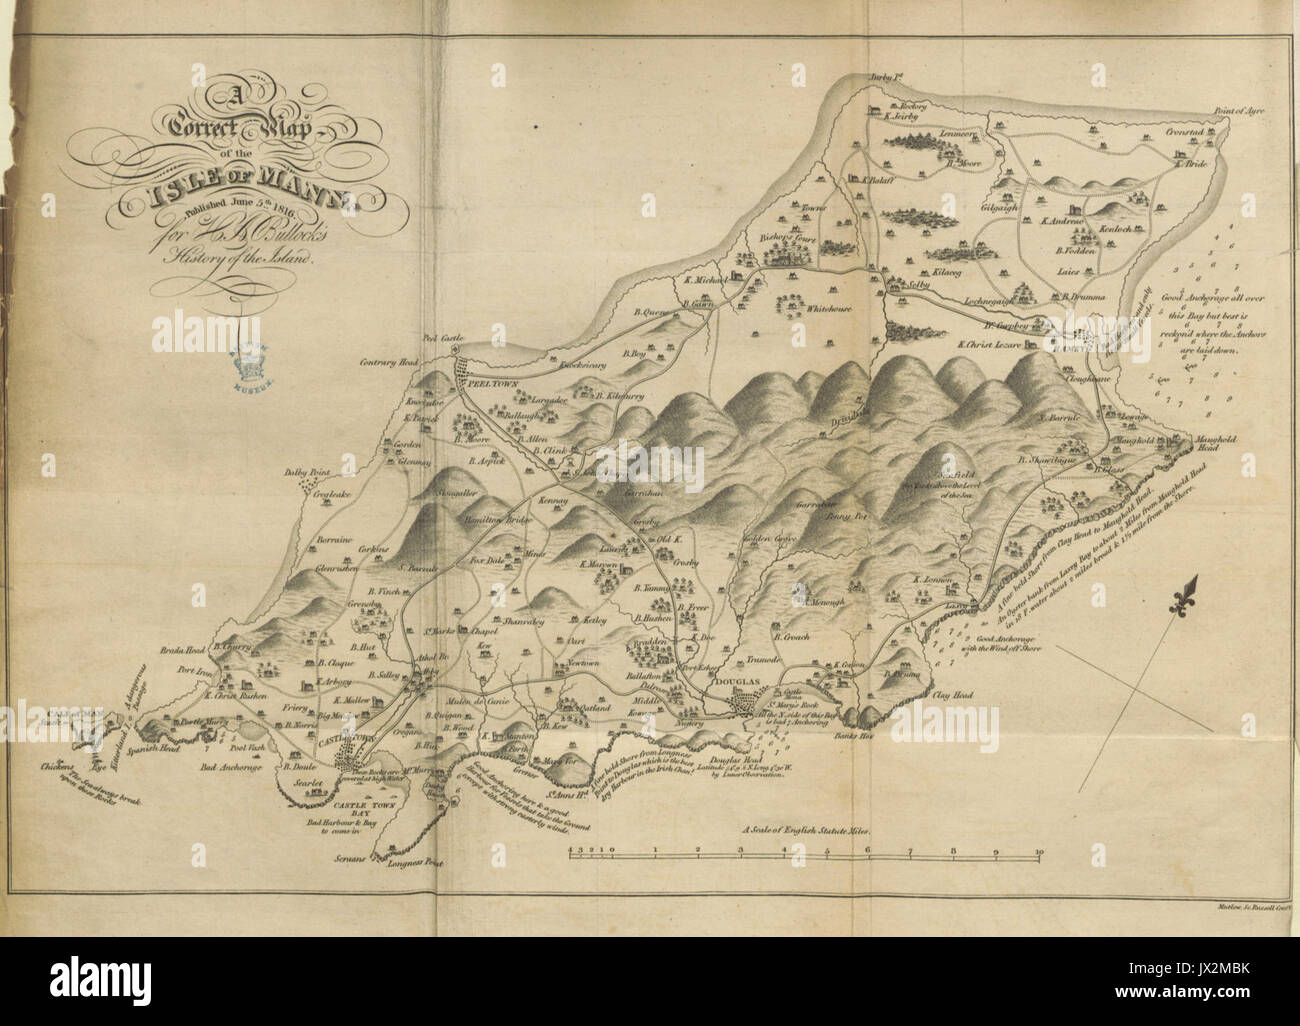 A Correct Map of the ISLE of MANN, published 1816 Stock Photo